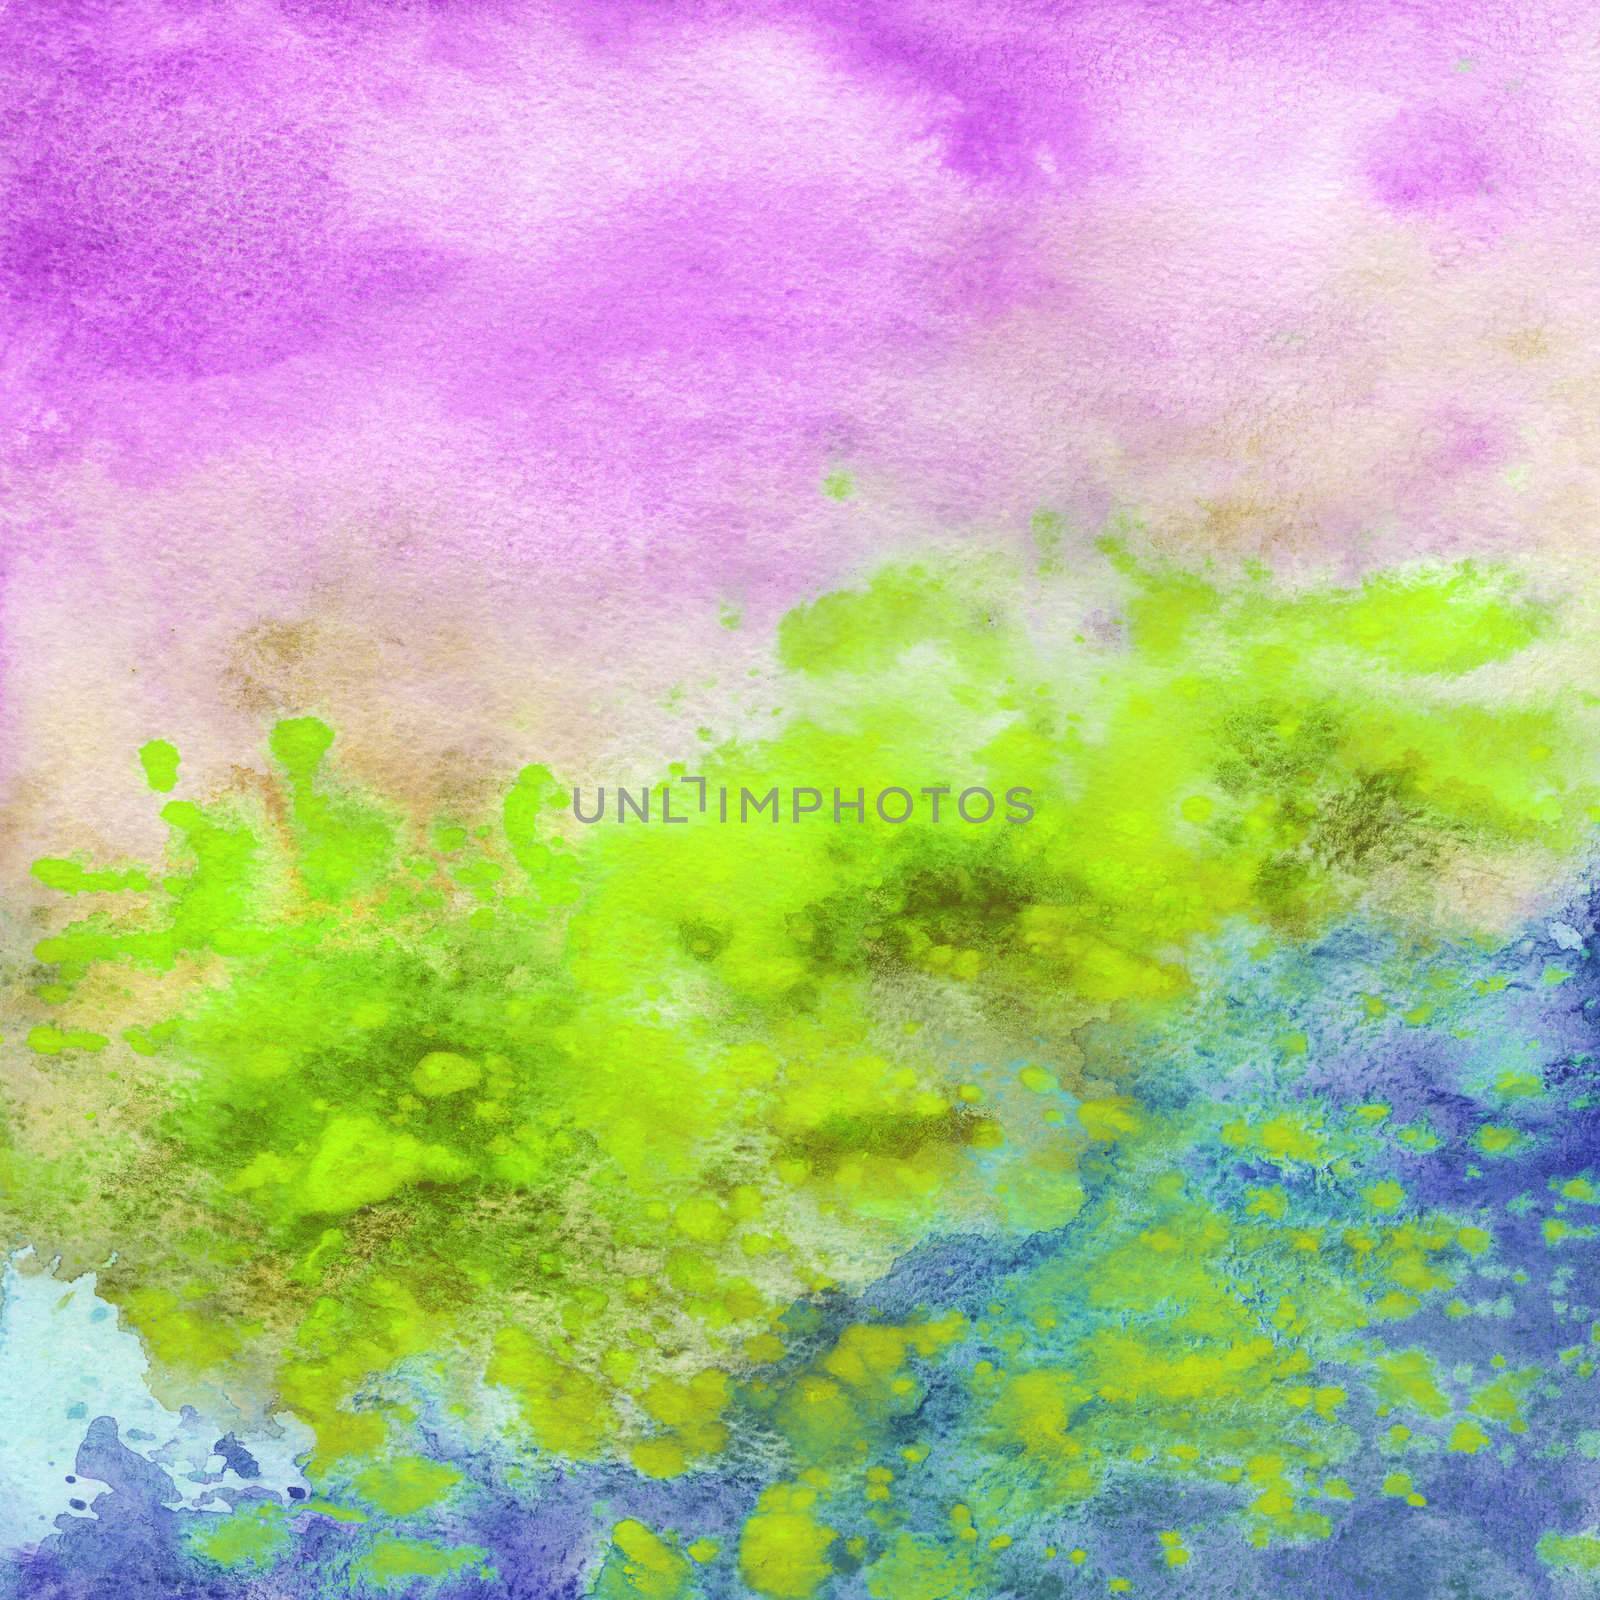 Abstract background, watercolor, hand painted on a paper. Green, violet, blue, yellow